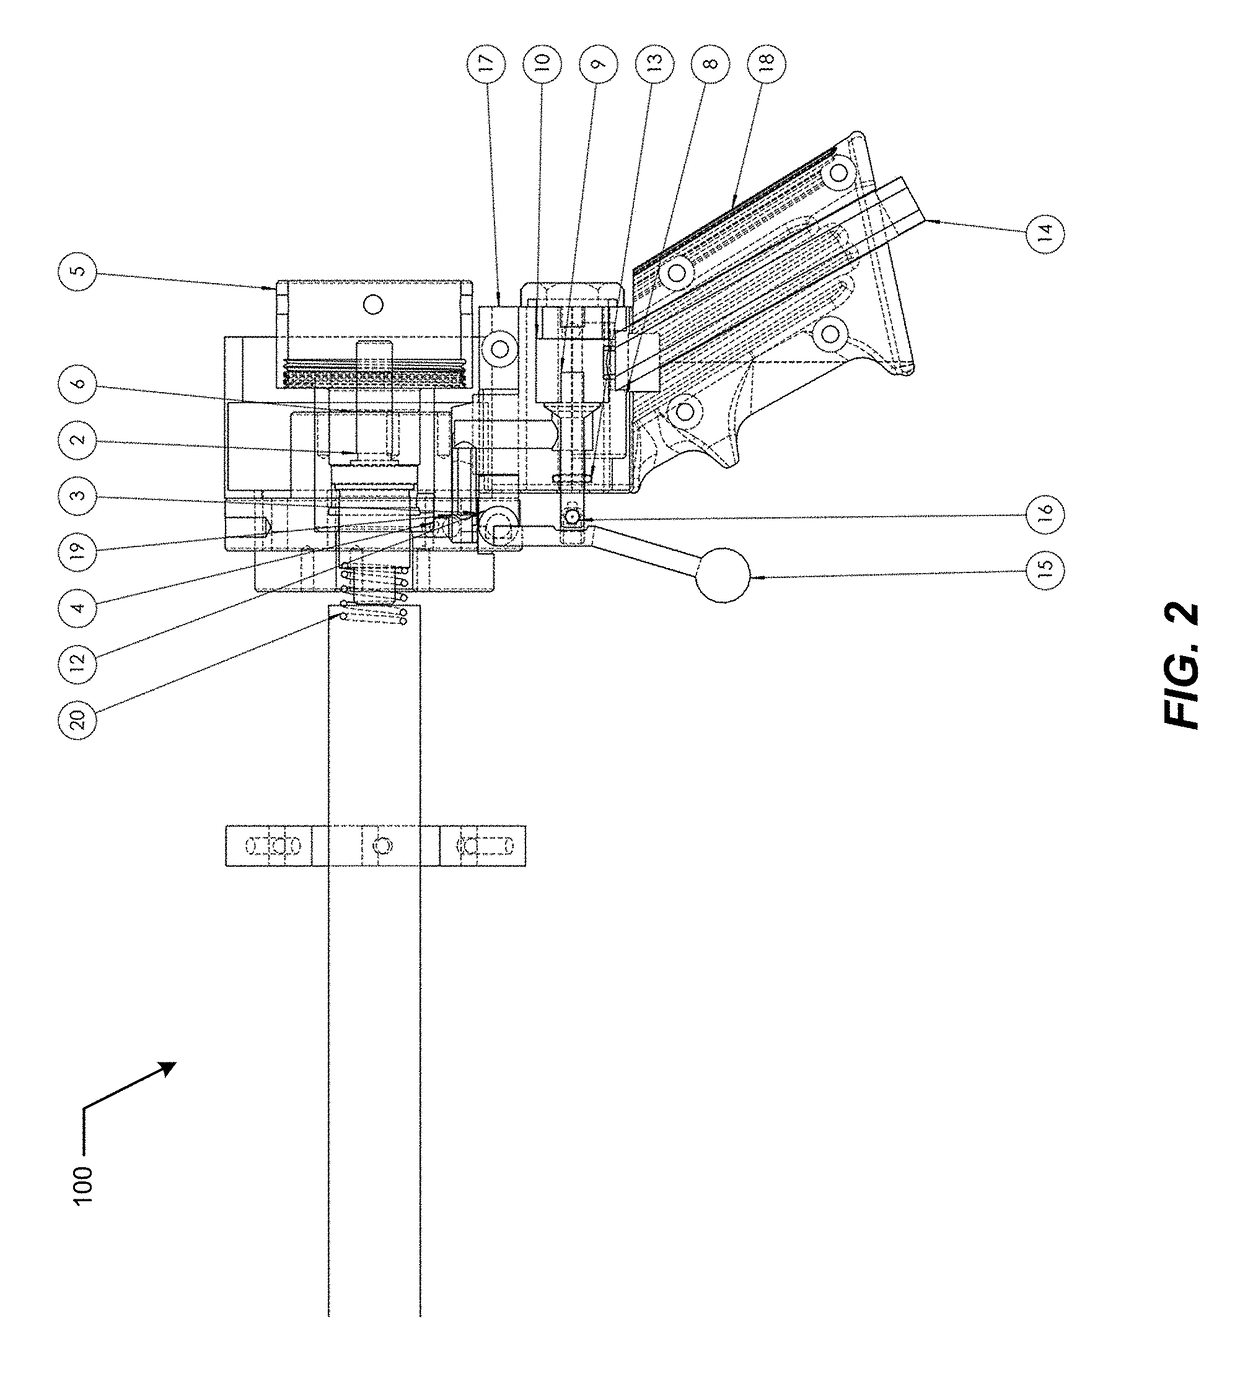 Prosthesis installation systems and methods